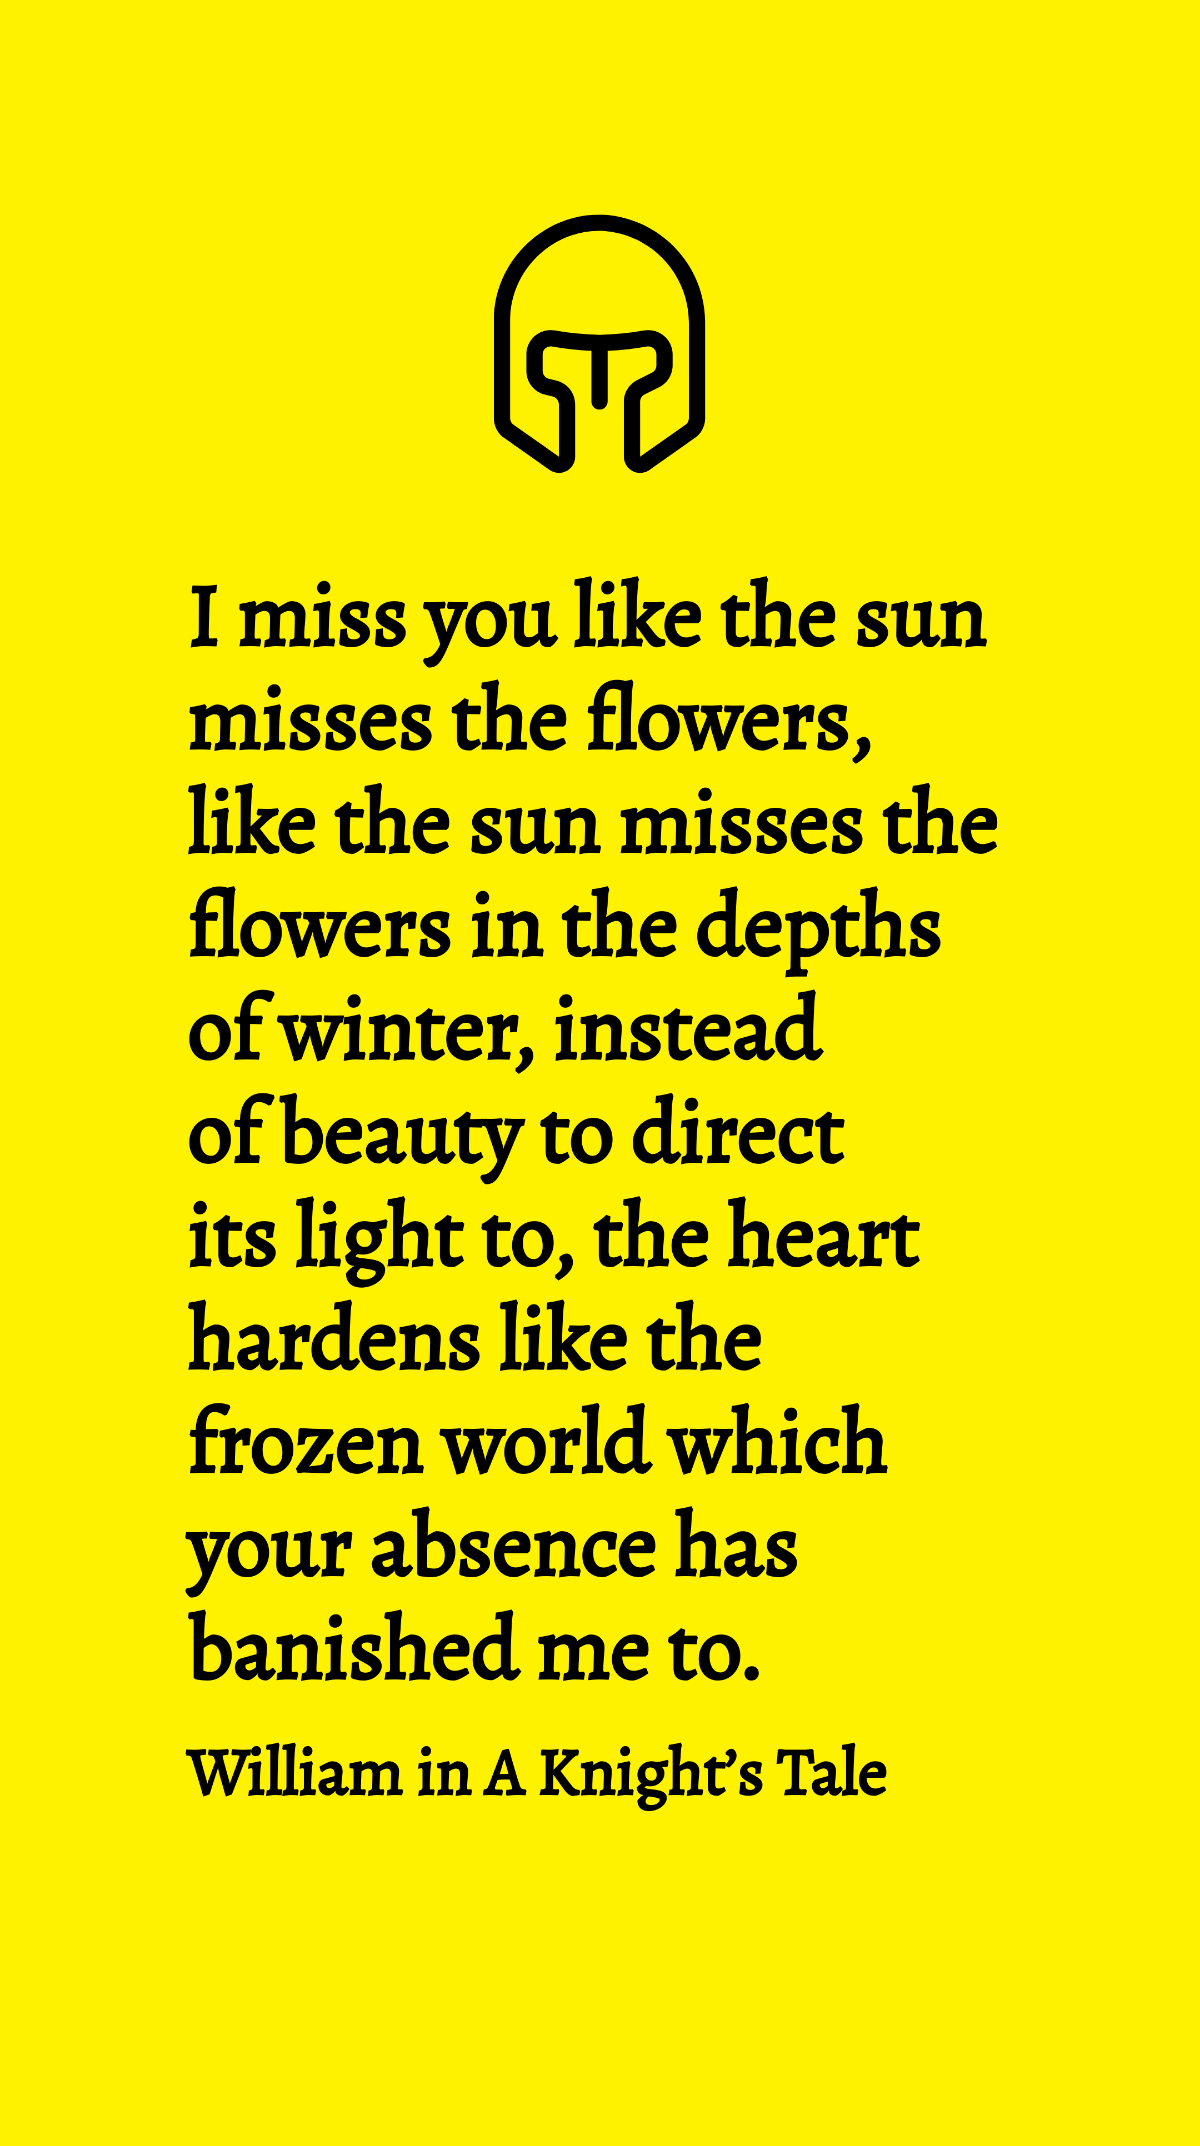 Free William in A Knight’s Tale - I miss you like the sun misses the flowers, like the sun misses the flowers in the depths of winter, instead of beauty to direct its light to, the heart hardens like the f